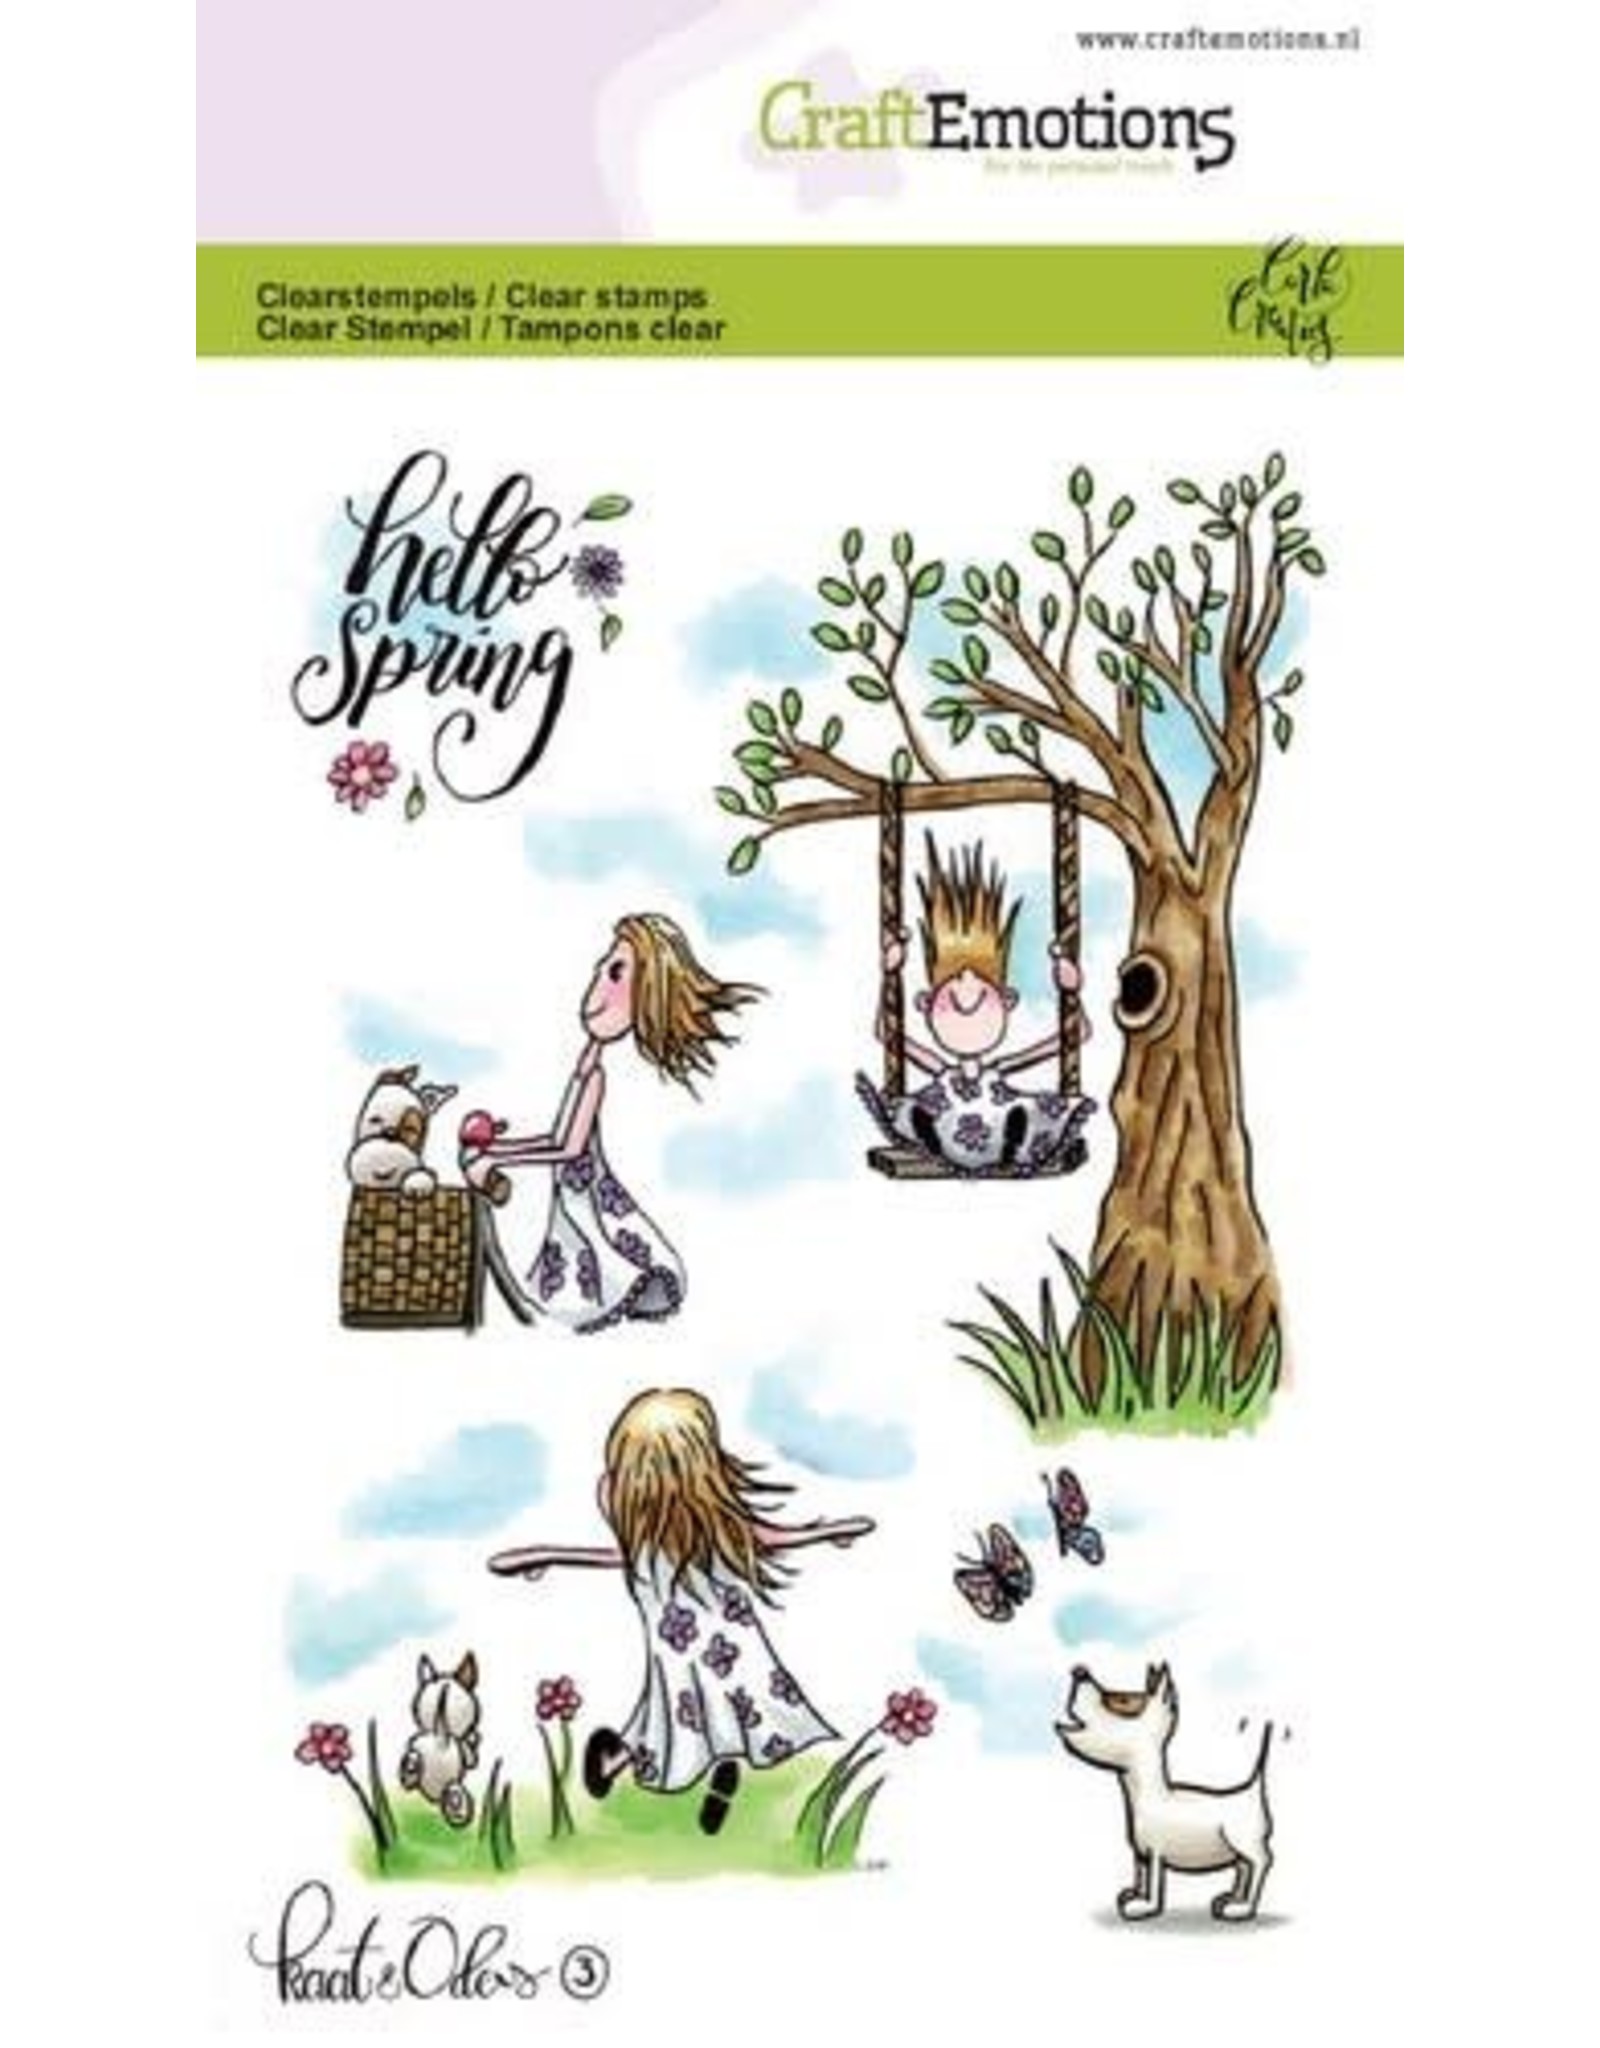 Craft Emotions CraftEmotions clearstamps A6 - Kaat en Odey 3 Spring Carla Creaties